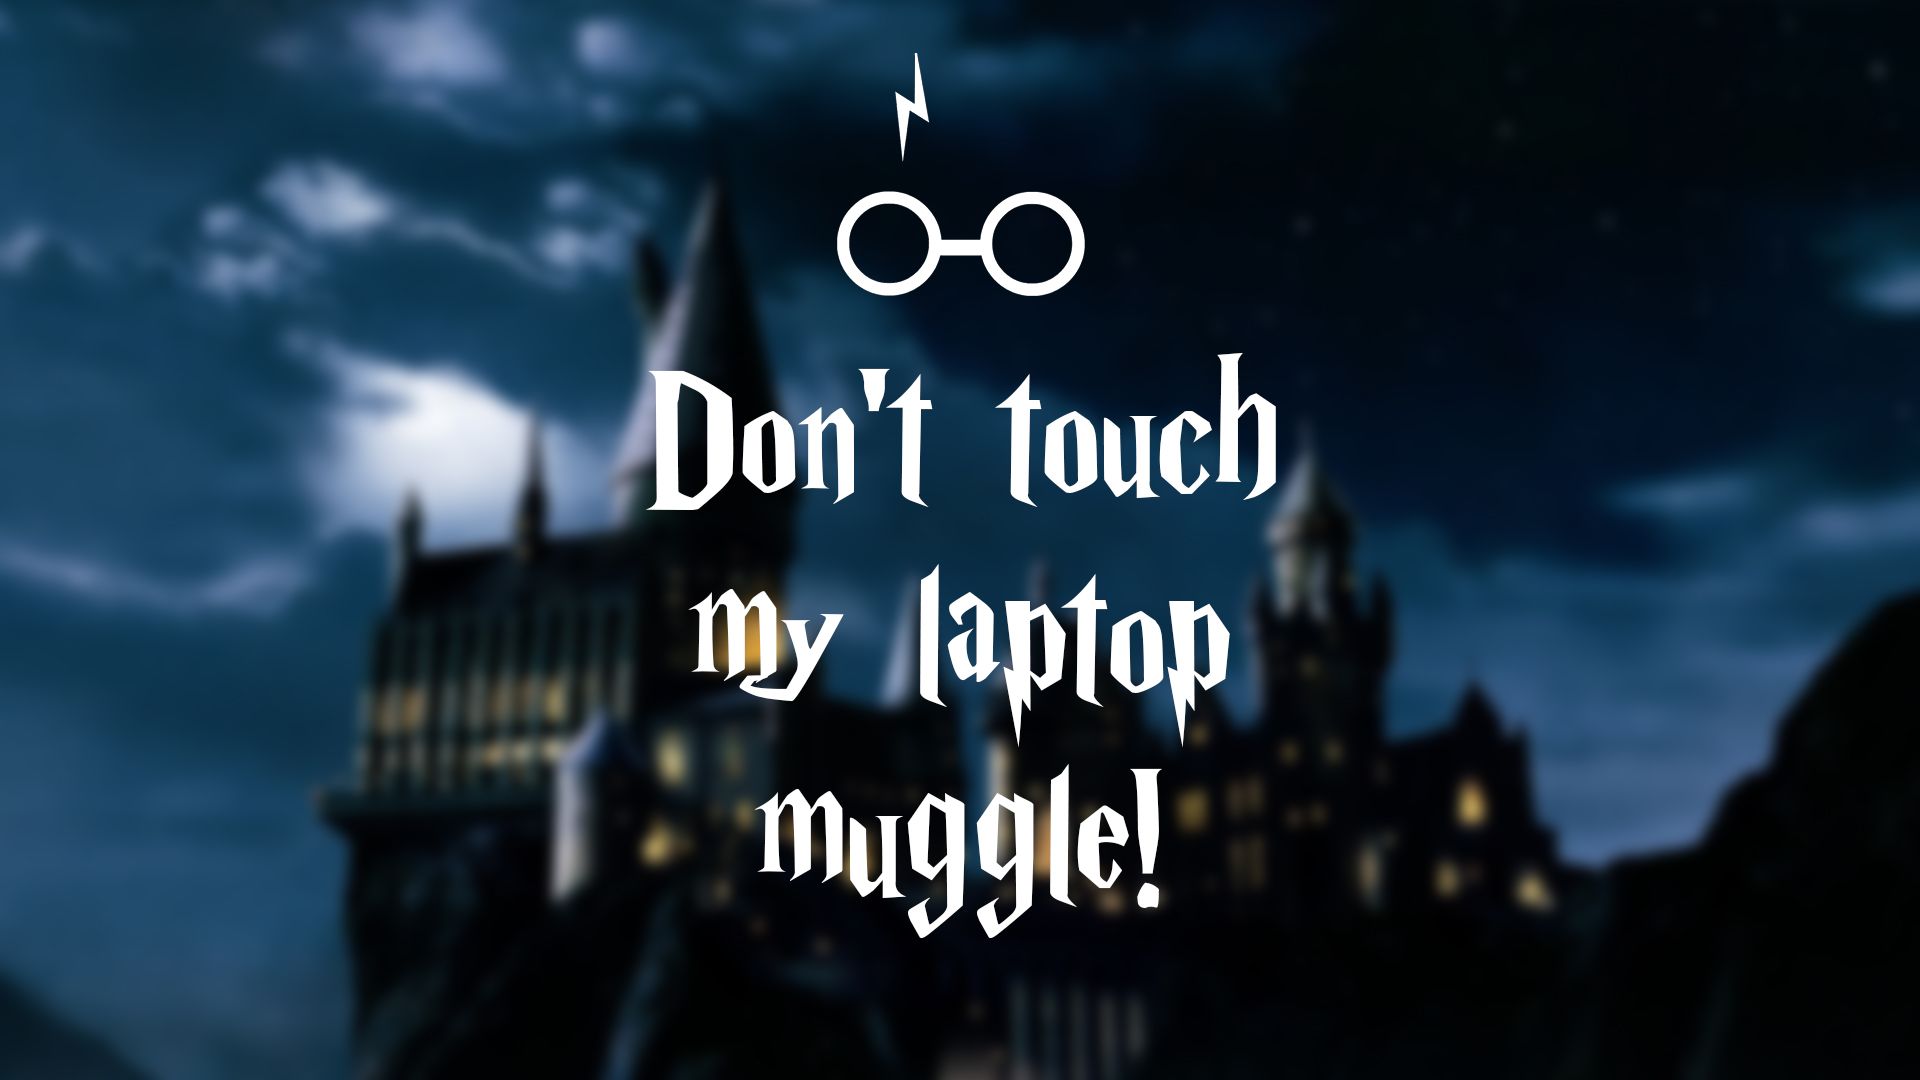 Dont Touch My Laptop Muggle - HD Wallpaper 